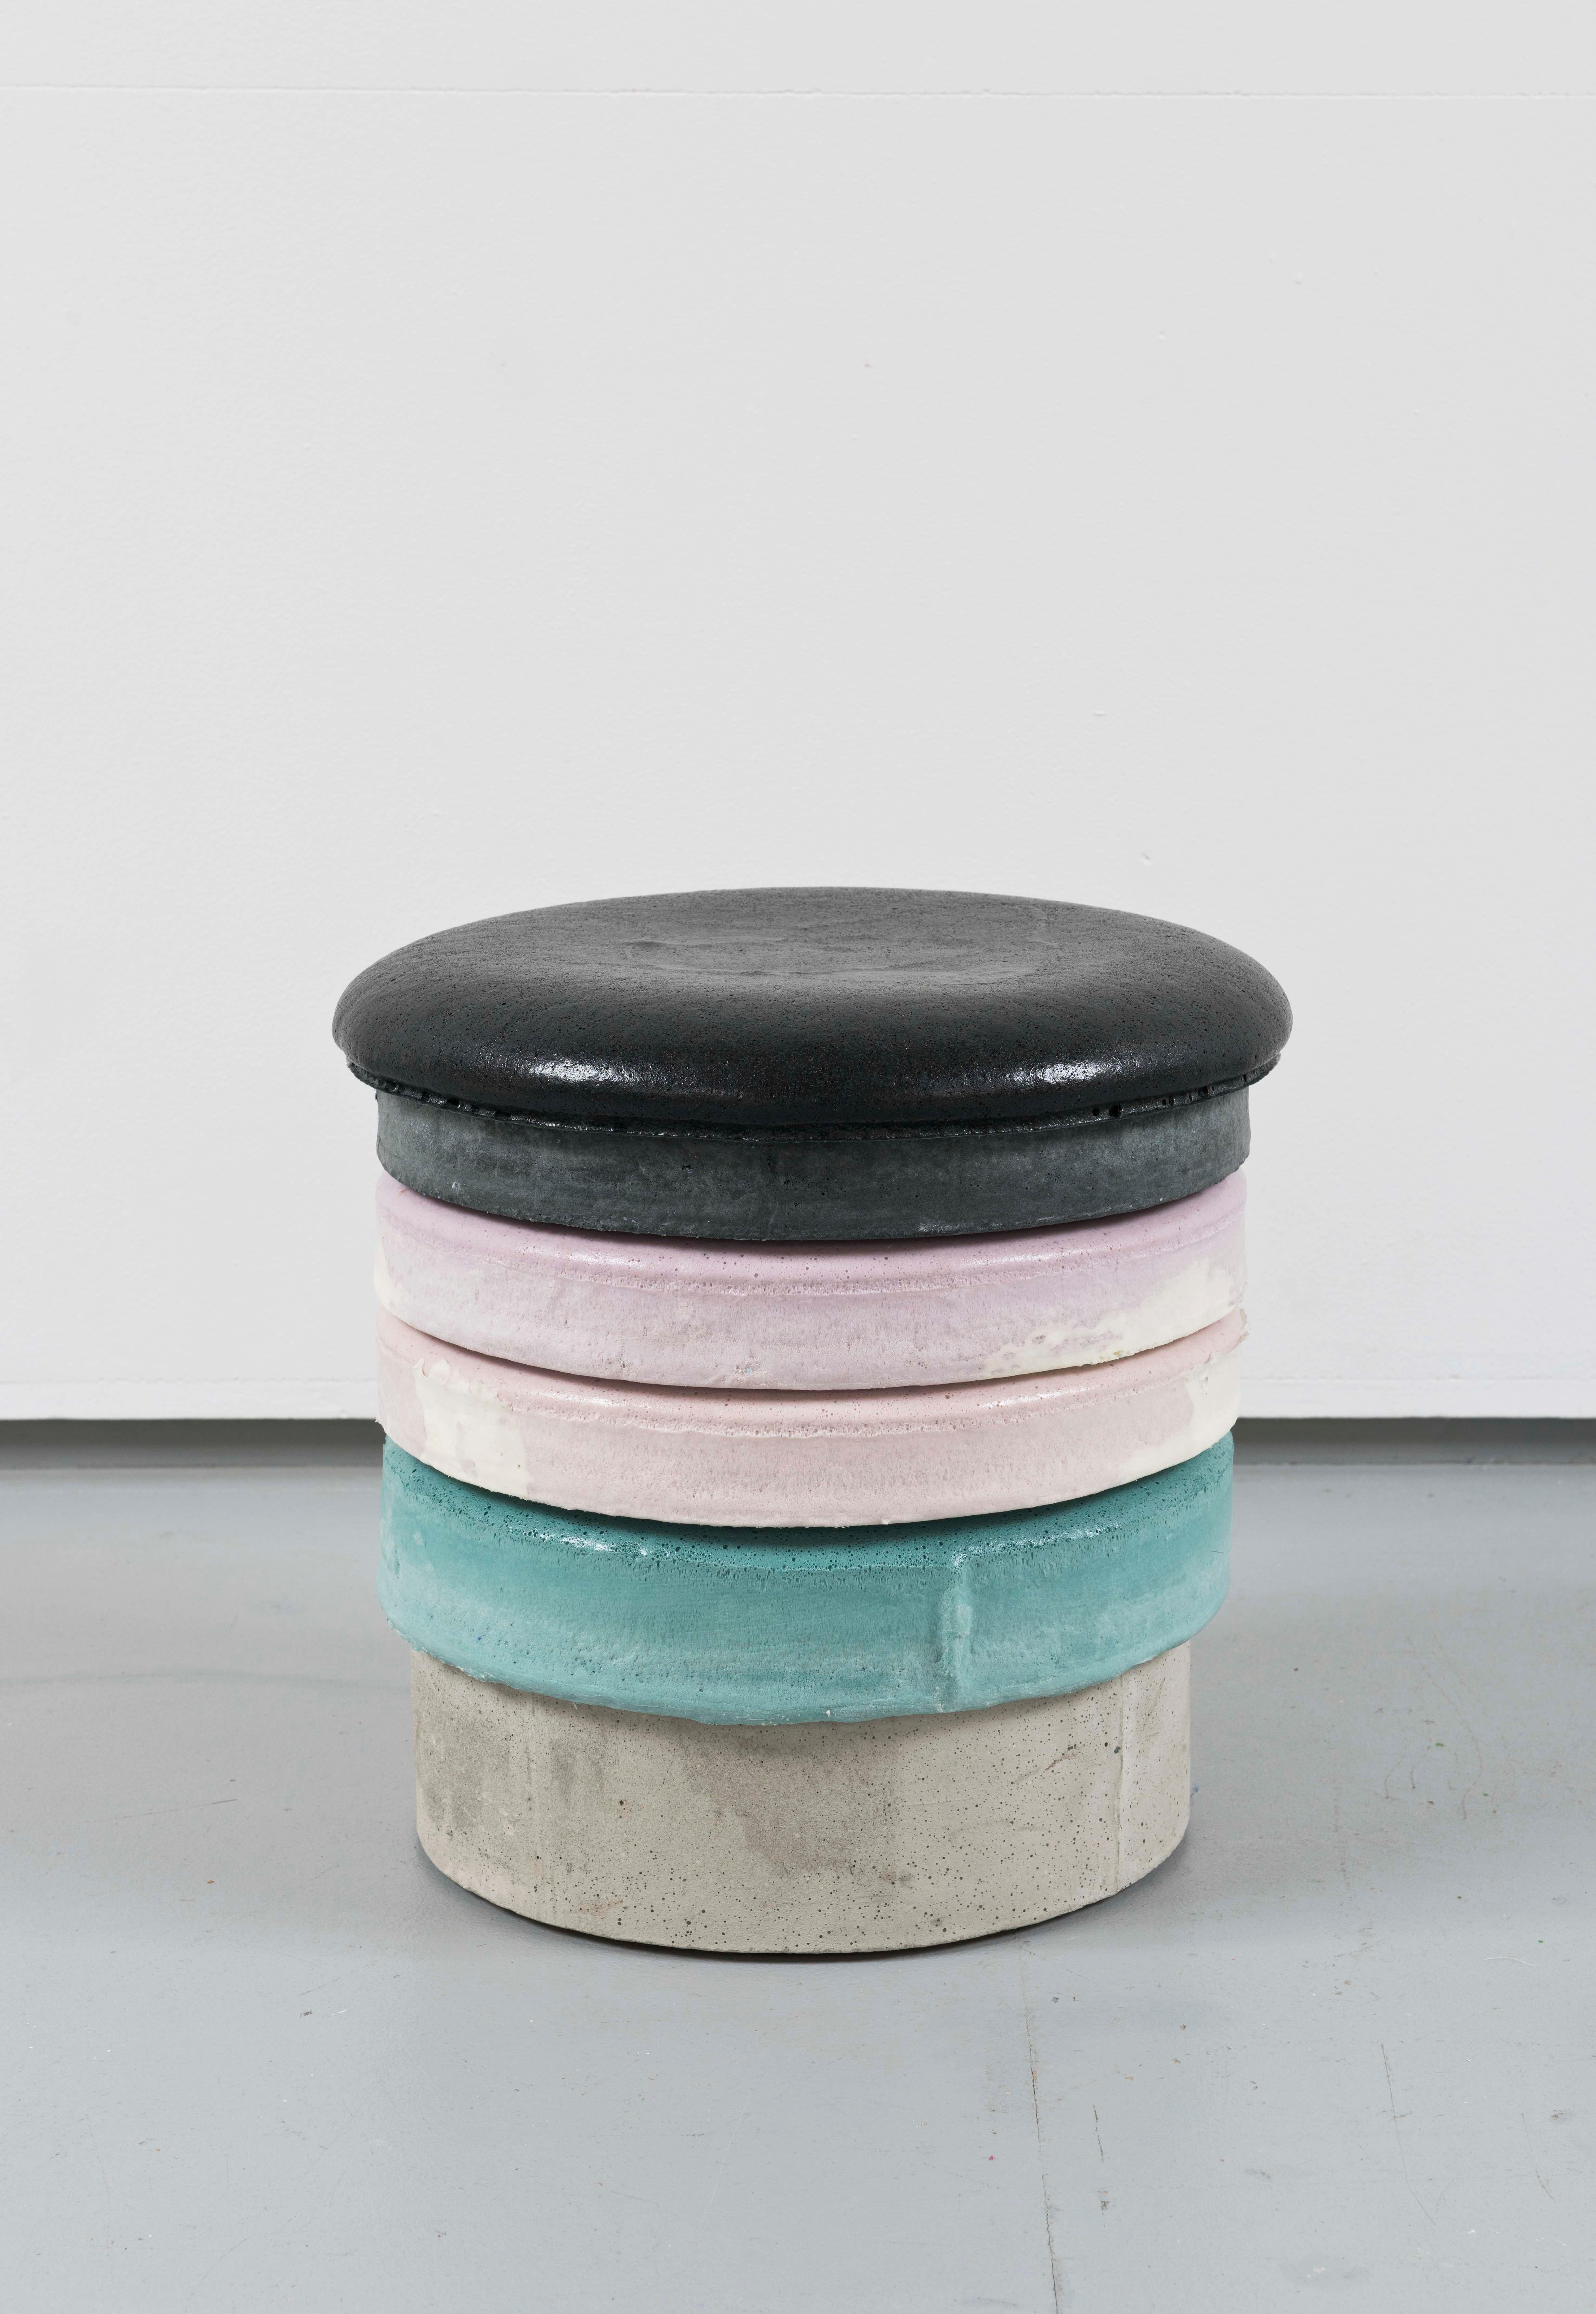 Cristian Andersen
Macaron stool, 2020
Each unique, signed by the artist
Polyurethane, pigments, concrete and cork
H 39 cm (15 3/8 in) ø 37 cm

Cristian Andersen (*1974) has been working at the interface between design and sculpture for a long